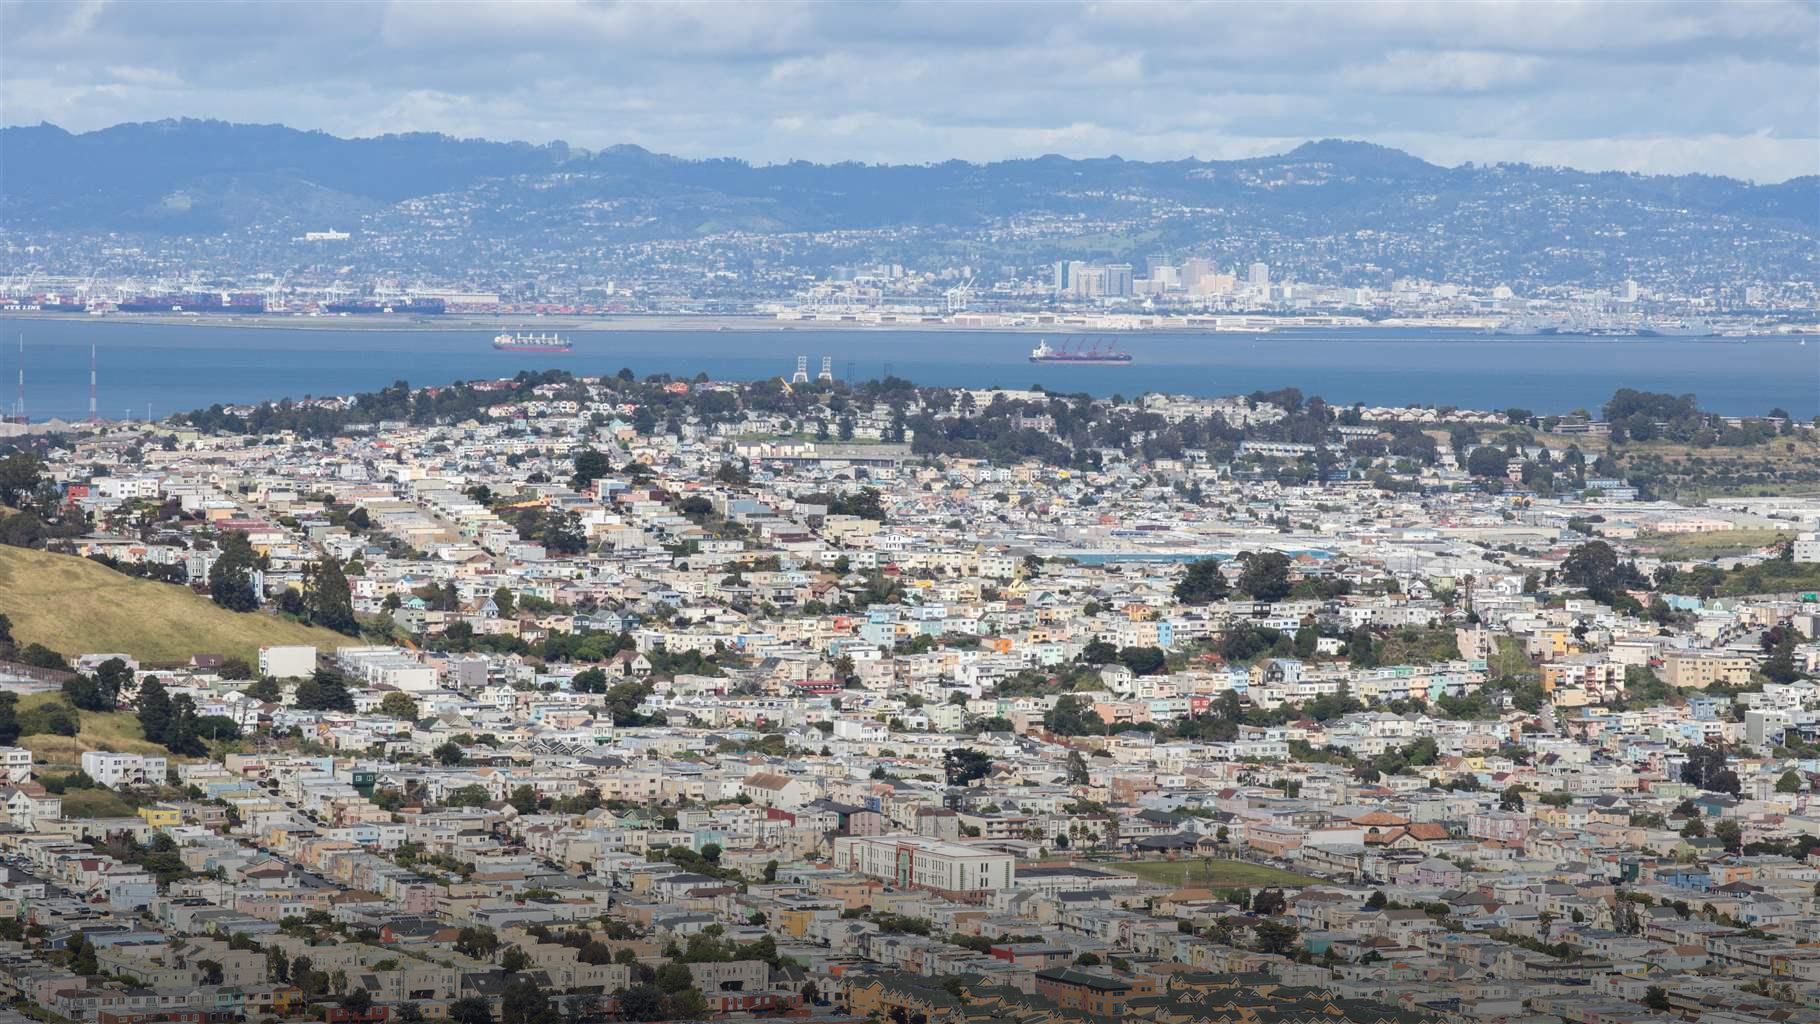 Aerial View of Daly City and Brisbane from San Bruno Mountain State Park.